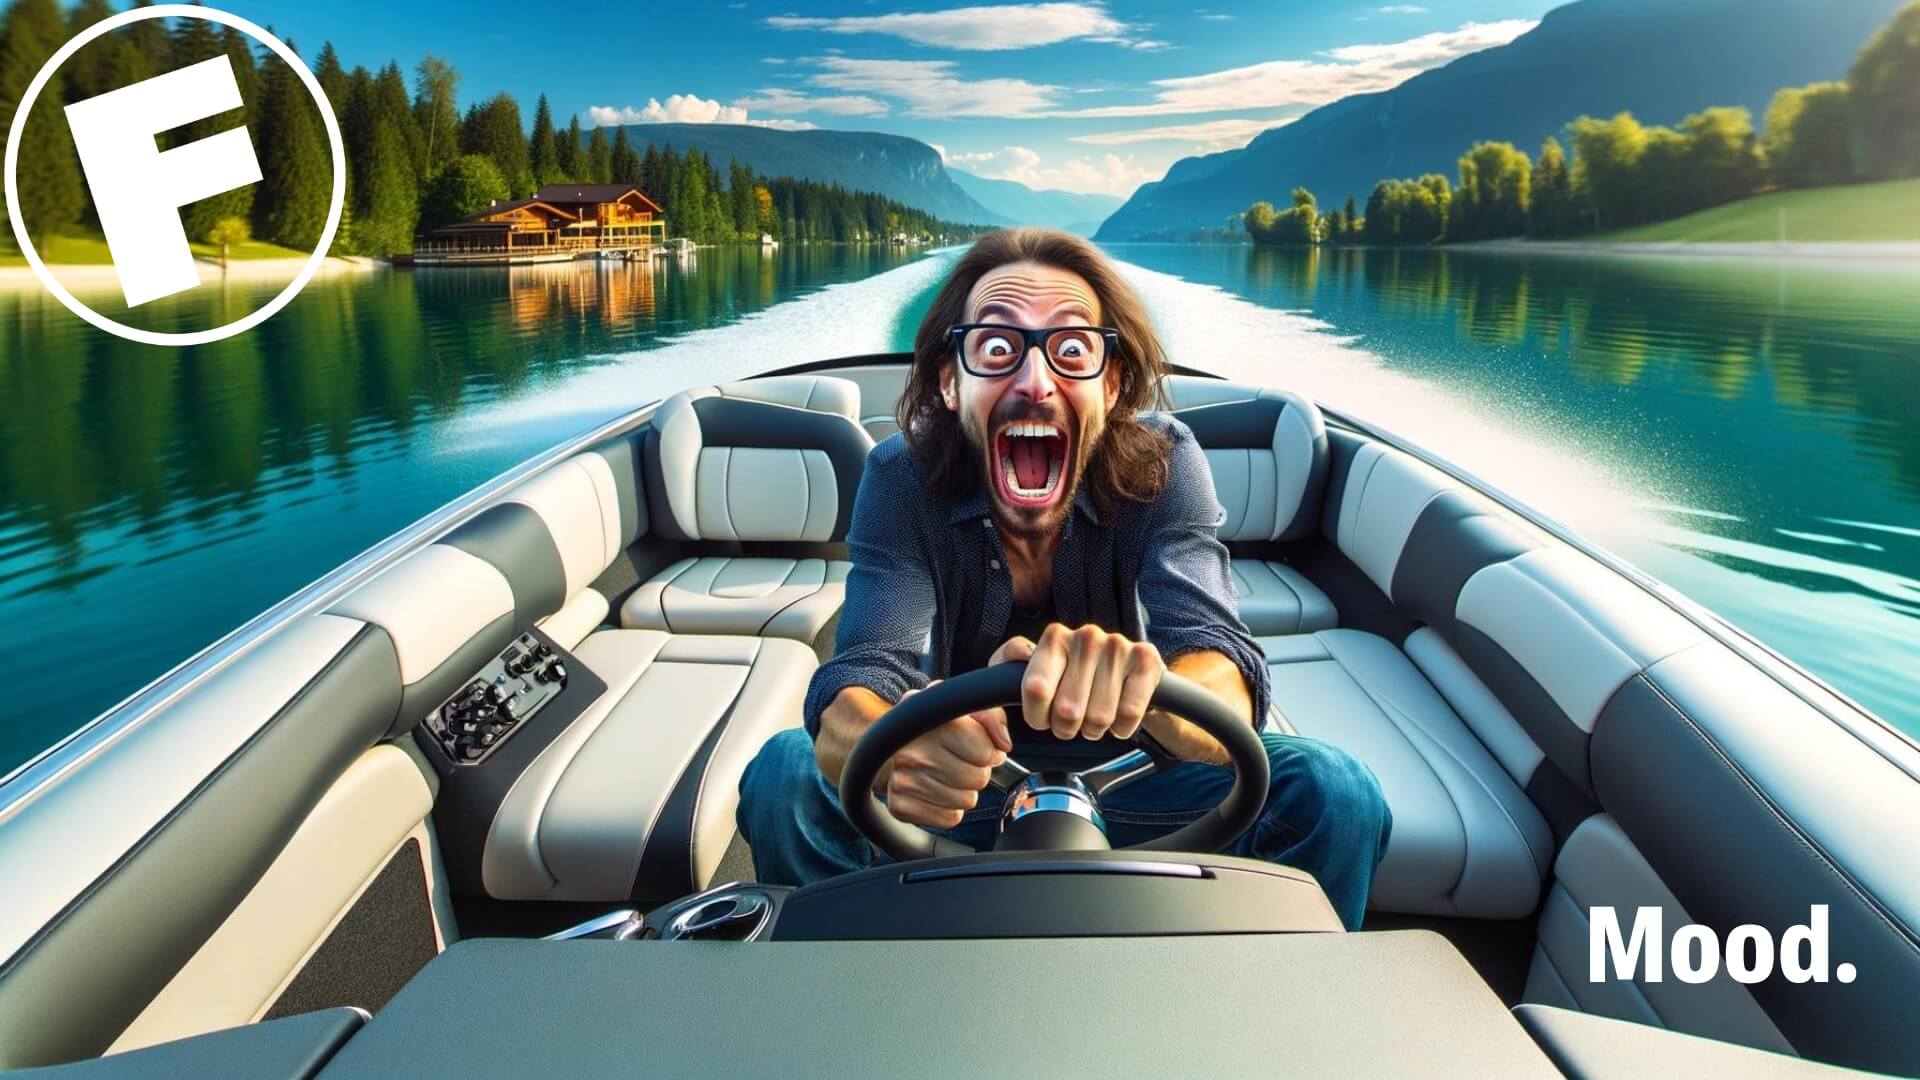 a man overjoyed by the thrill of cruising his speedboat on a beautiful lake